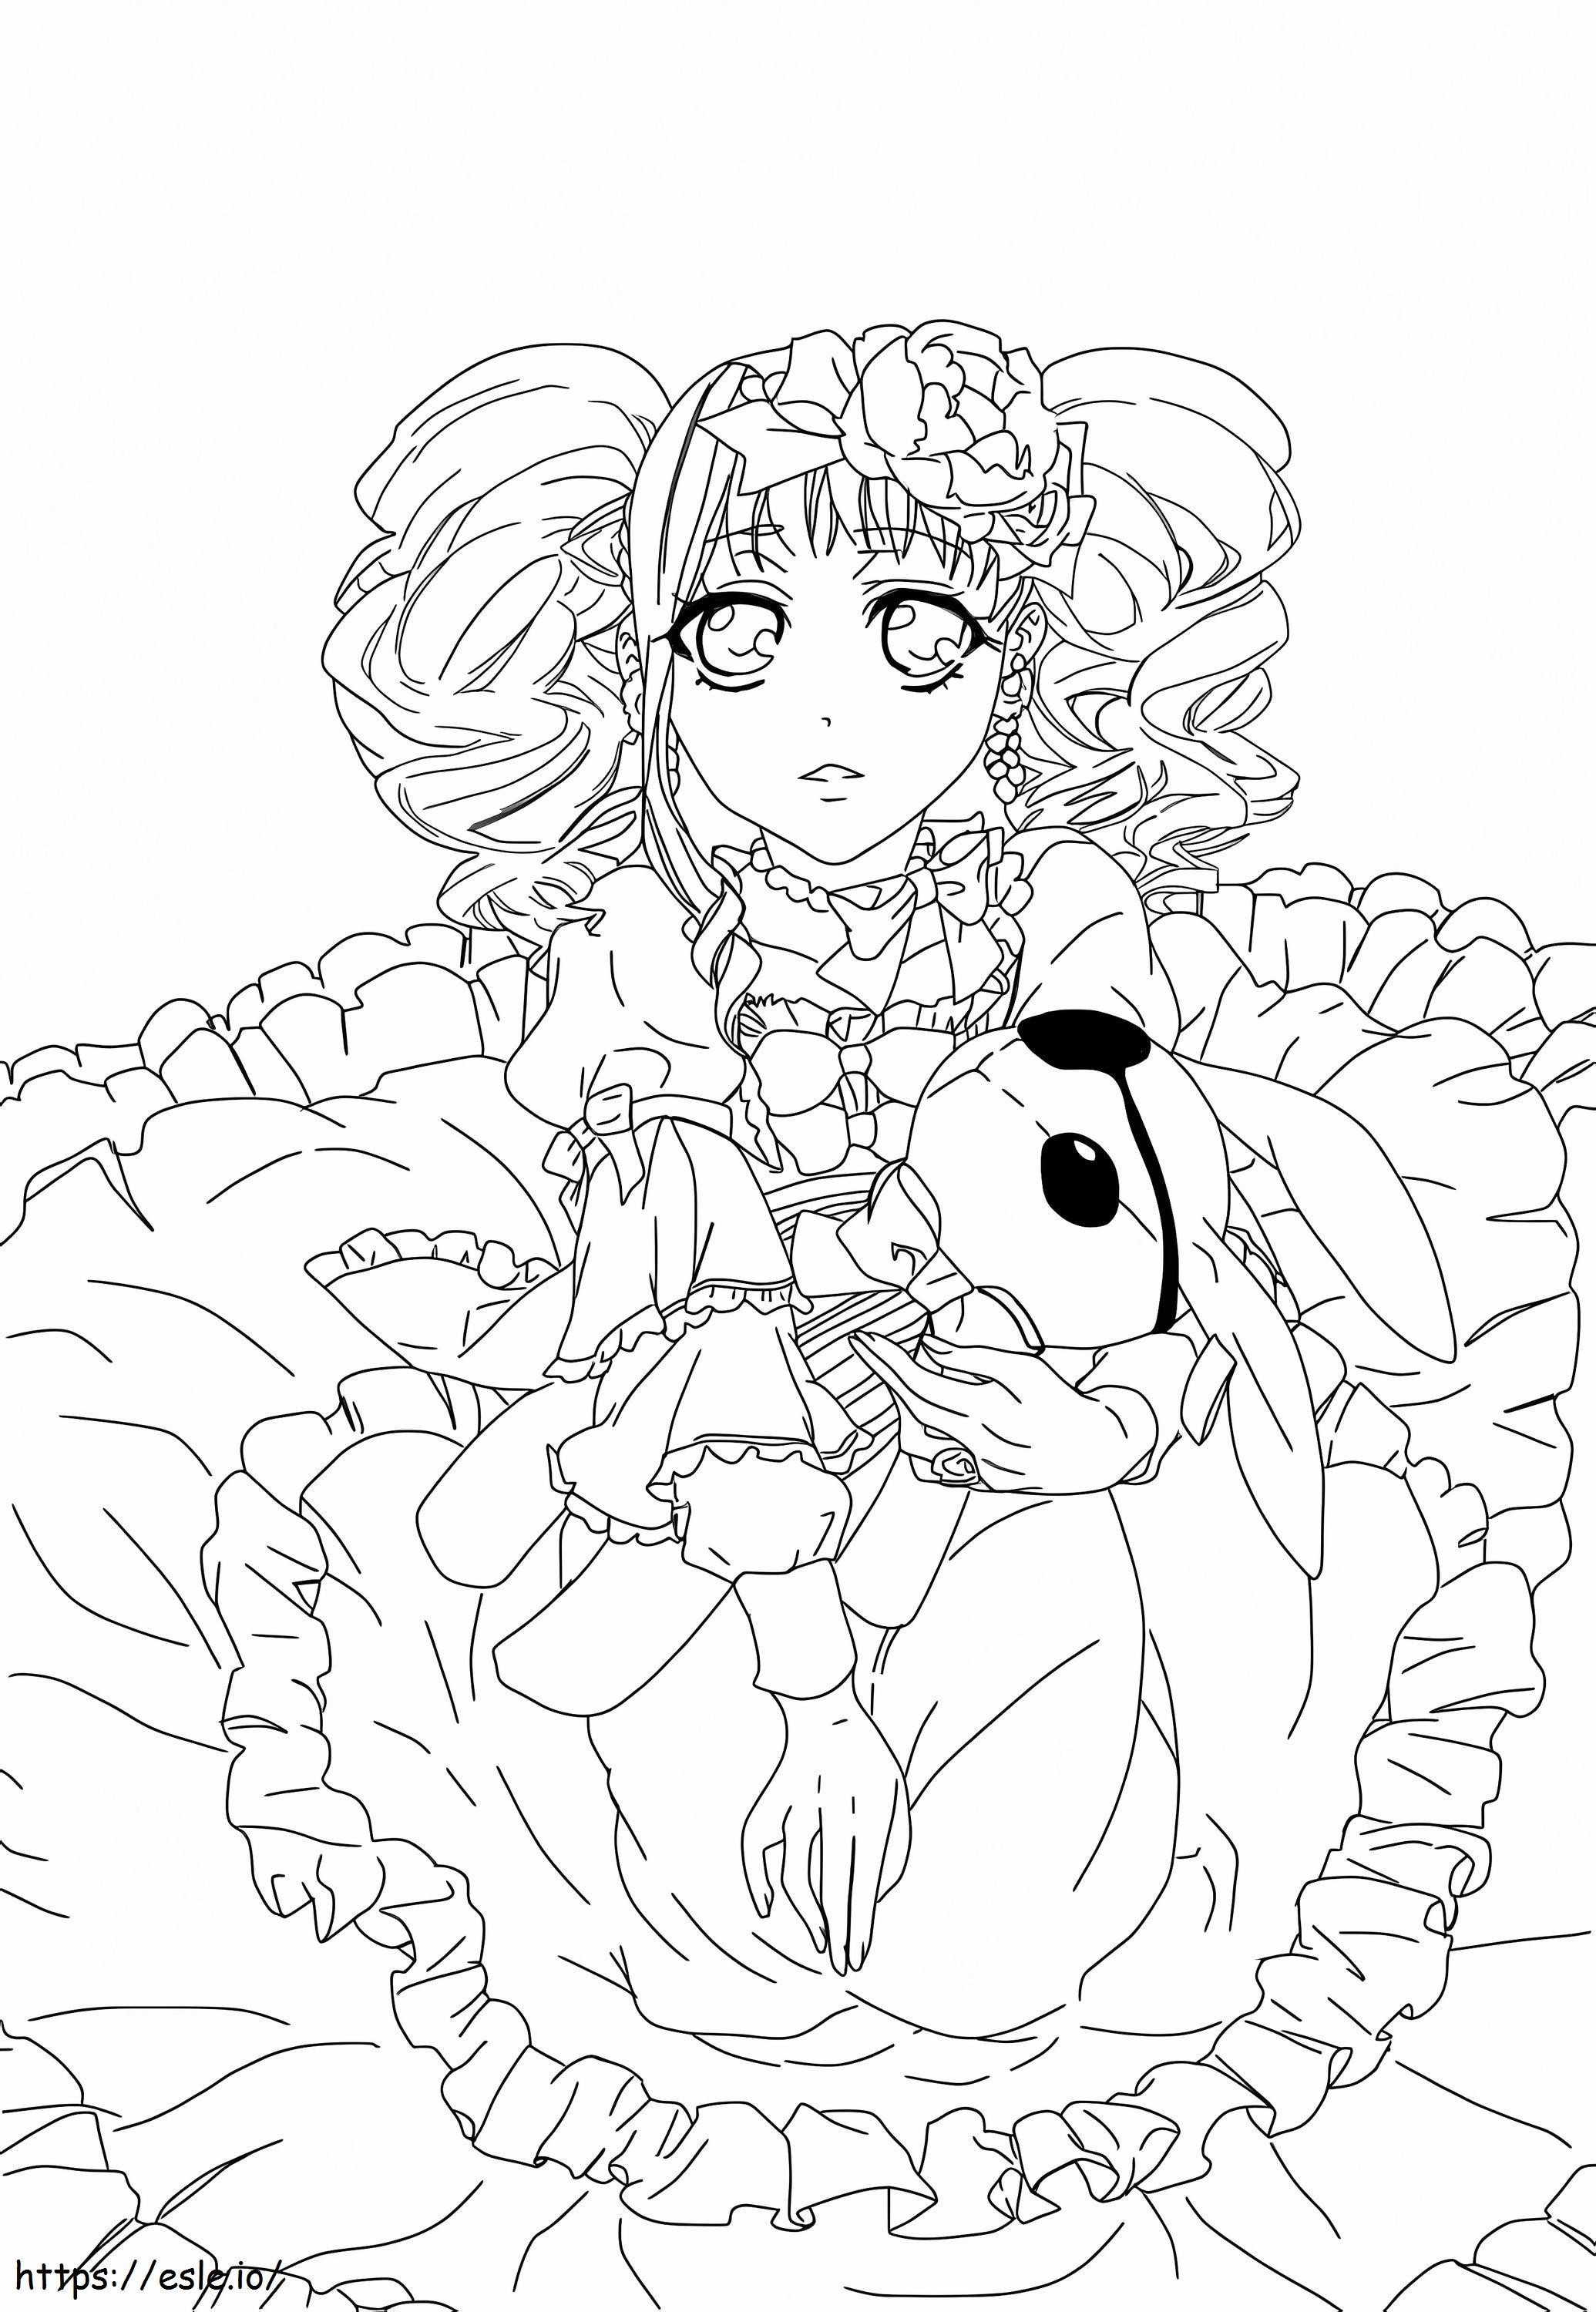 Lizzy From Black Butler coloring page